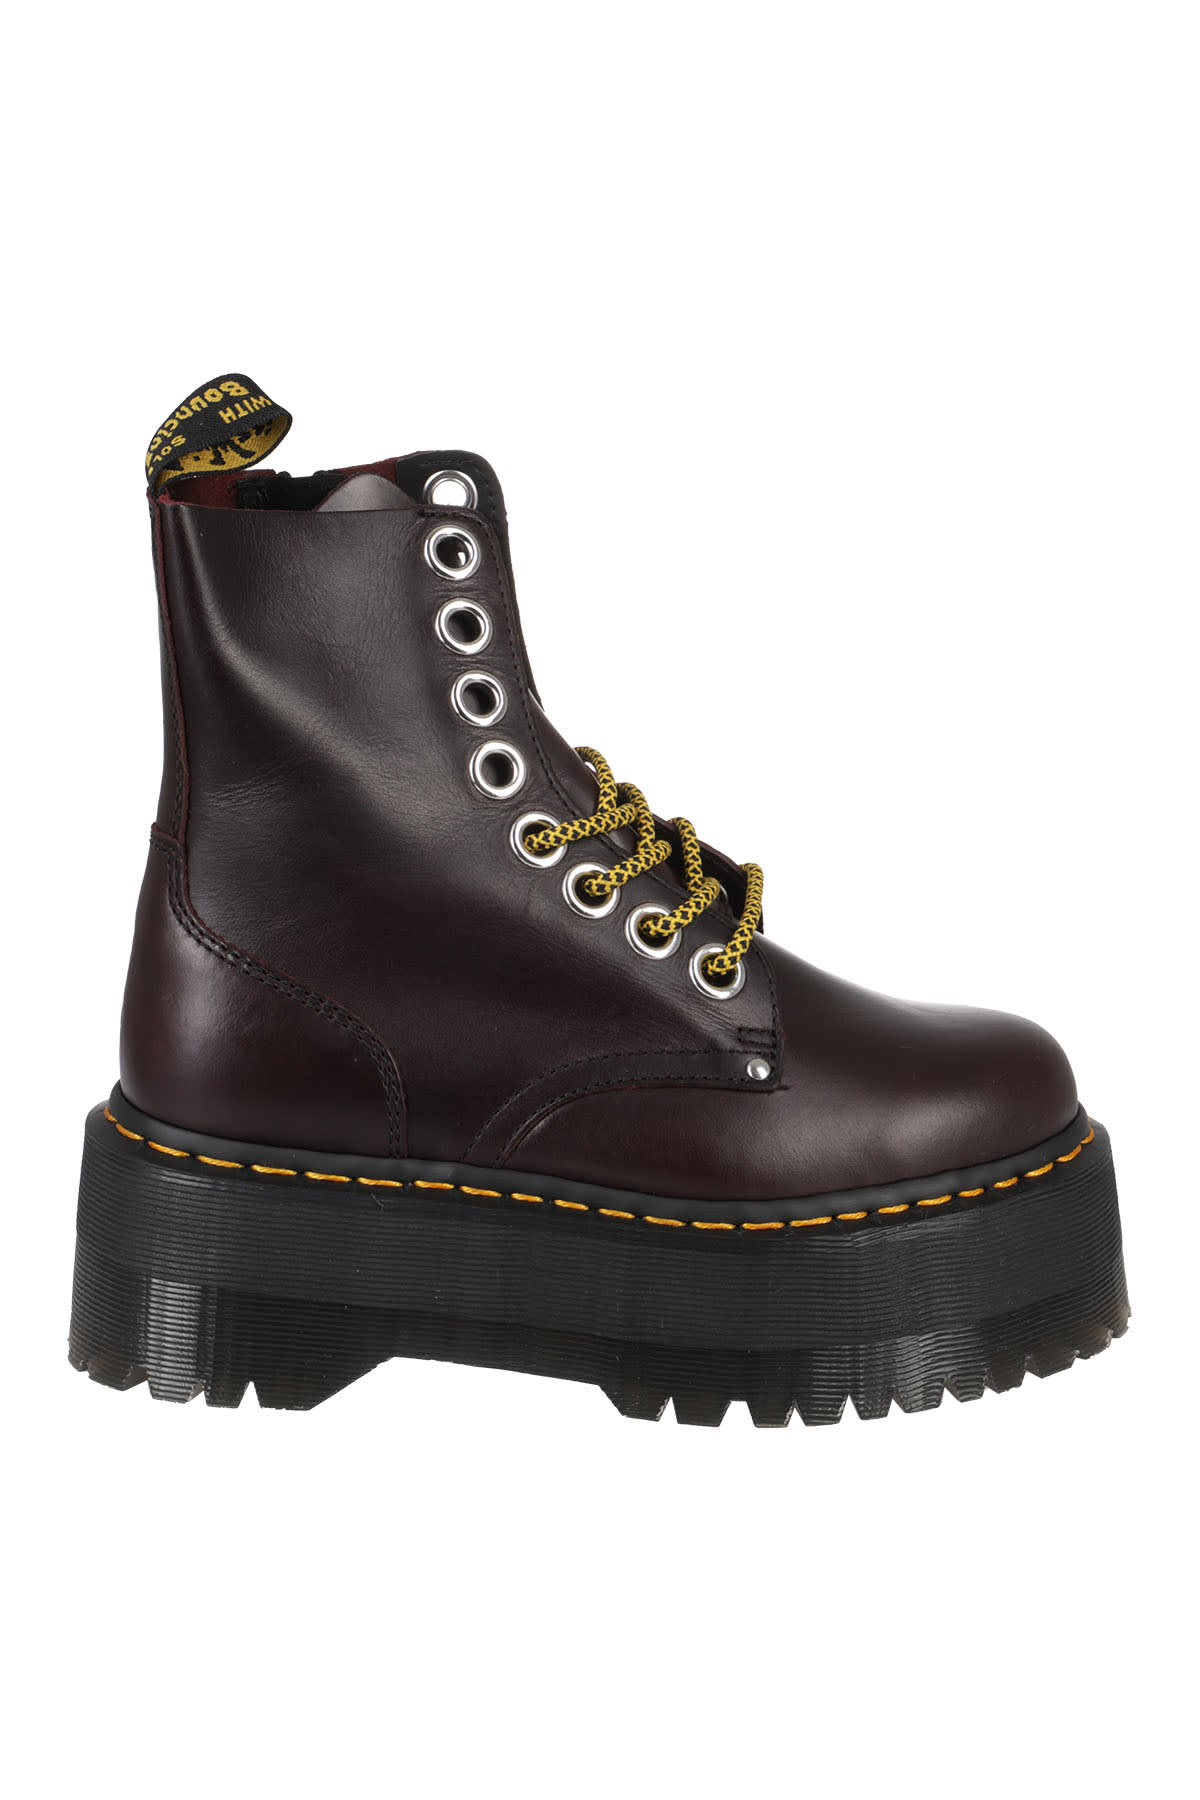 Buy Dr. Martens Boots online, shop Dr. Martens shoes with free shipping